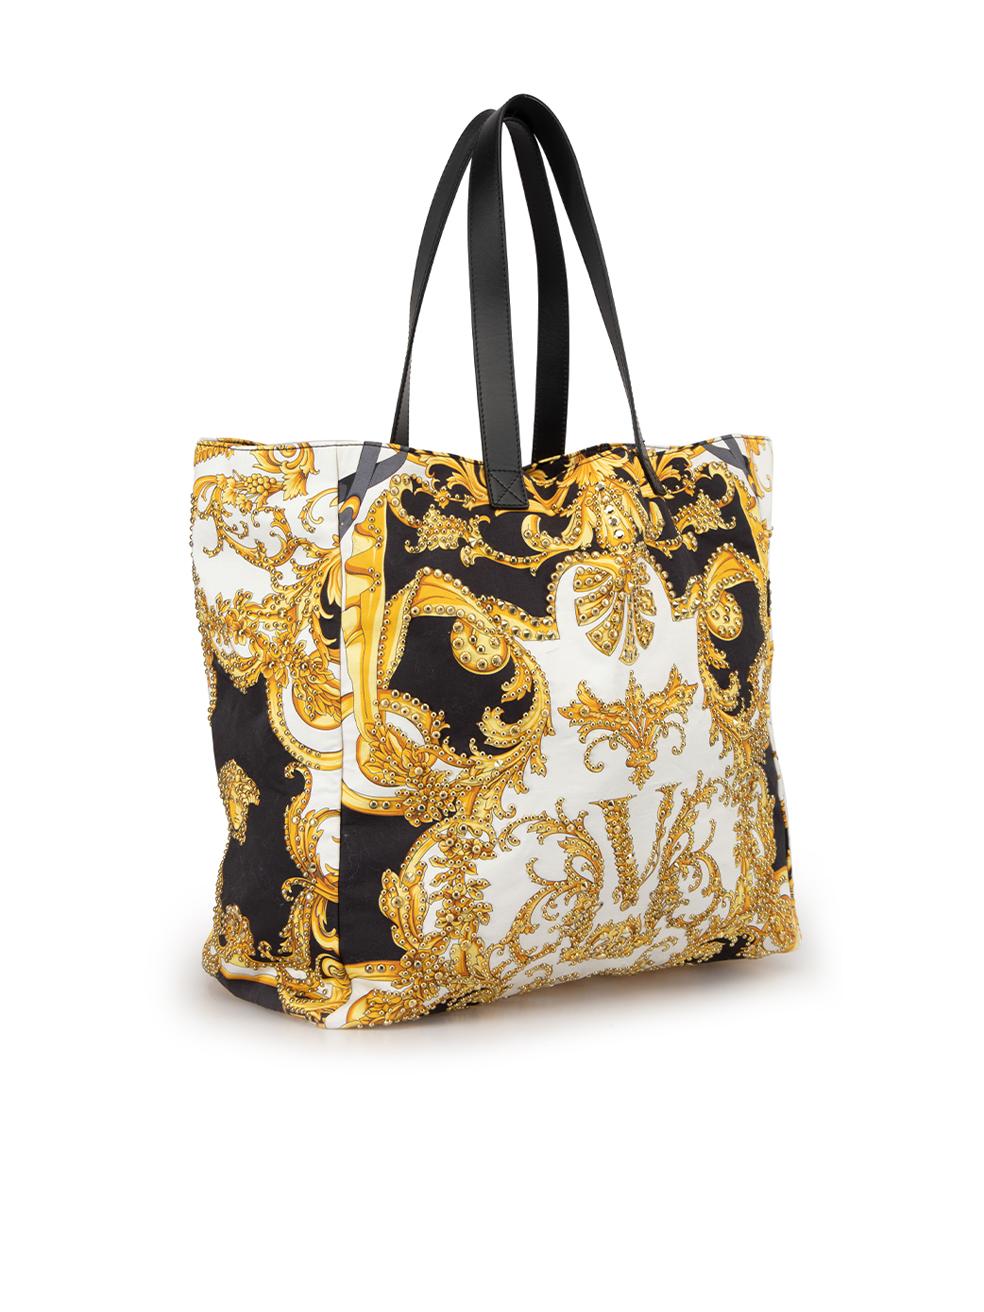 CONDITION is Very good. Minimal wear to bag is evident. Minimal wear to the front with two small marks on this used Versace designer resale item. 



Details


Multicolour

Cloth textile

Large tote bag

Barocco printed pattern

Gold studded